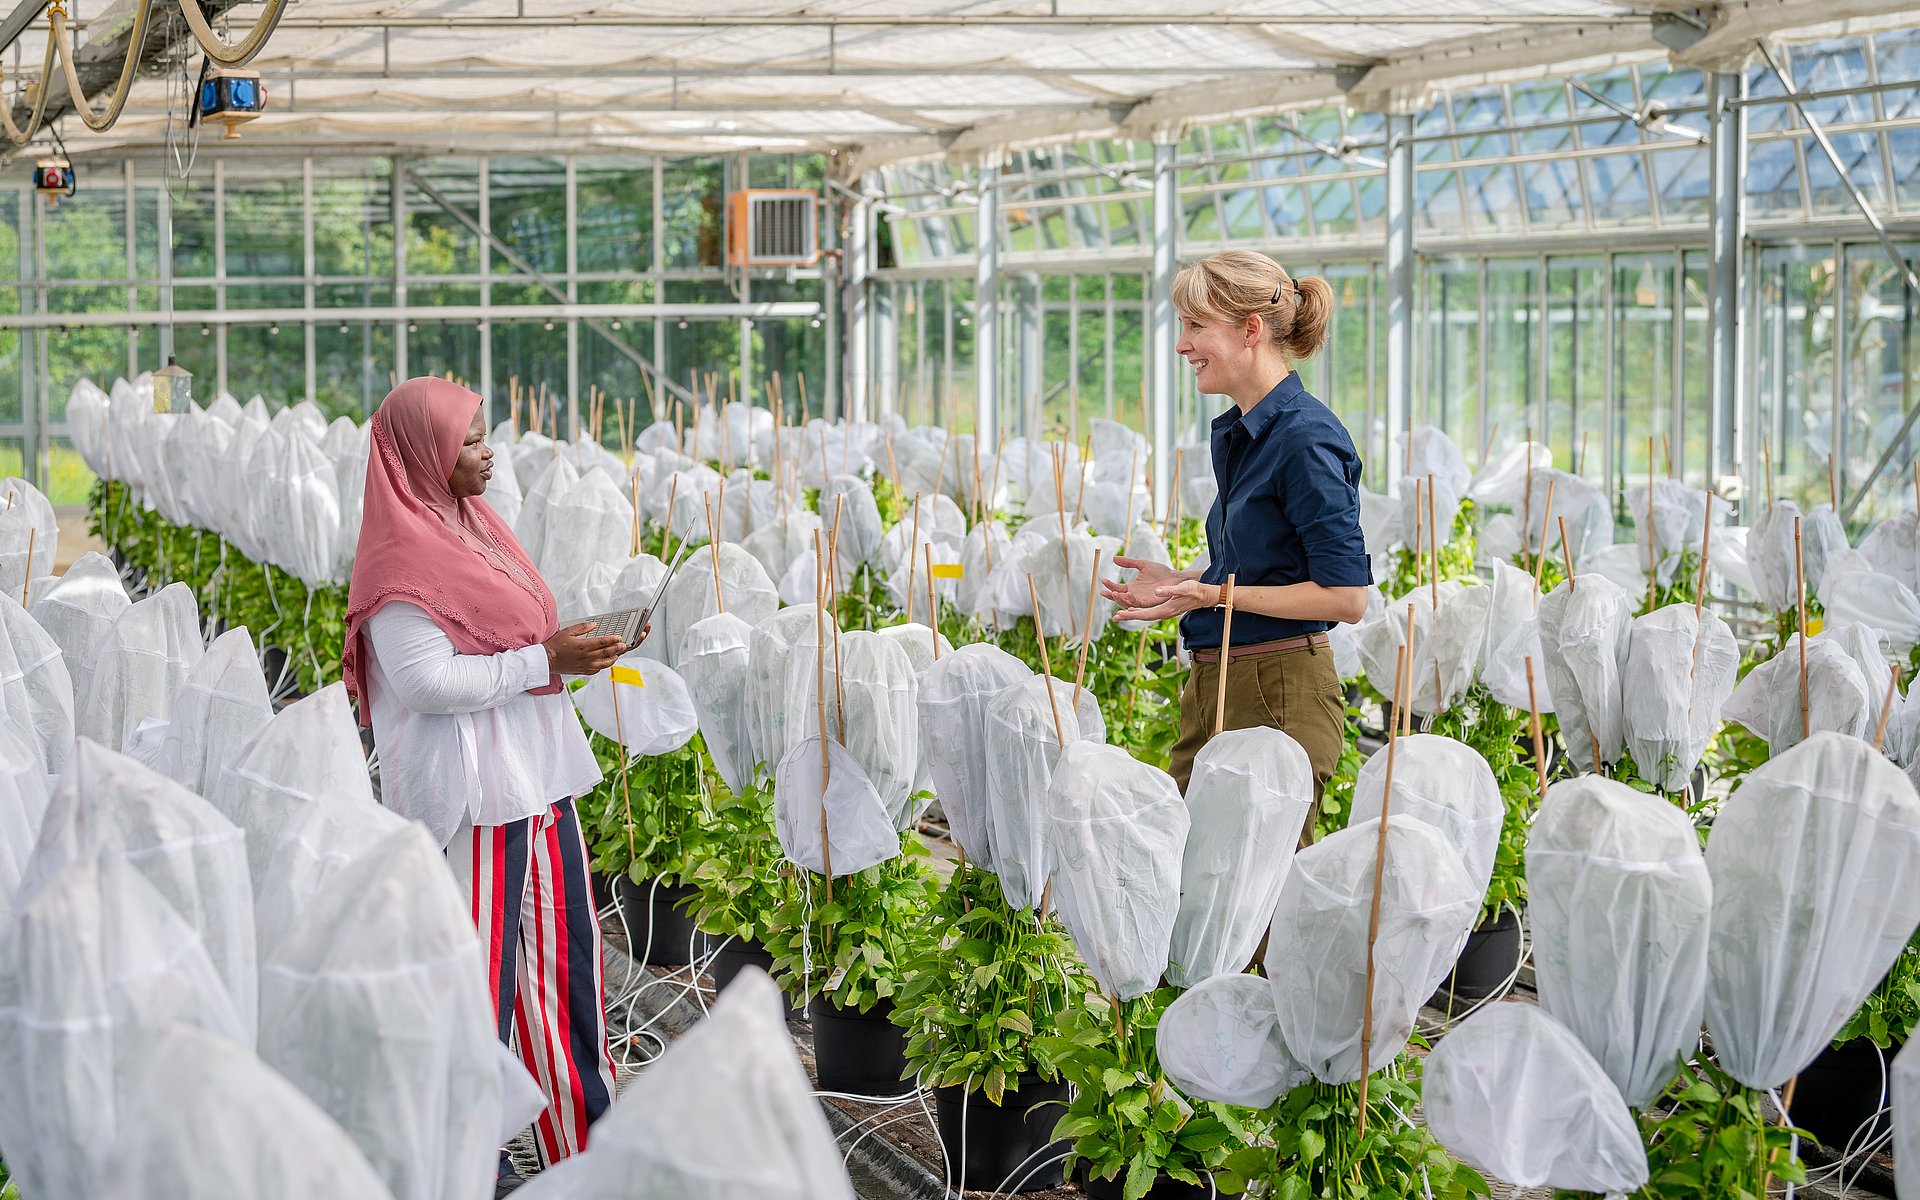  Prof. Brigitte Poppenberger (r.) and her doctoral student, Adebimpe Adedeji-Badmus, surrounded by Ebolo plants in a greenhouse of the TUM School of Life Sciences.